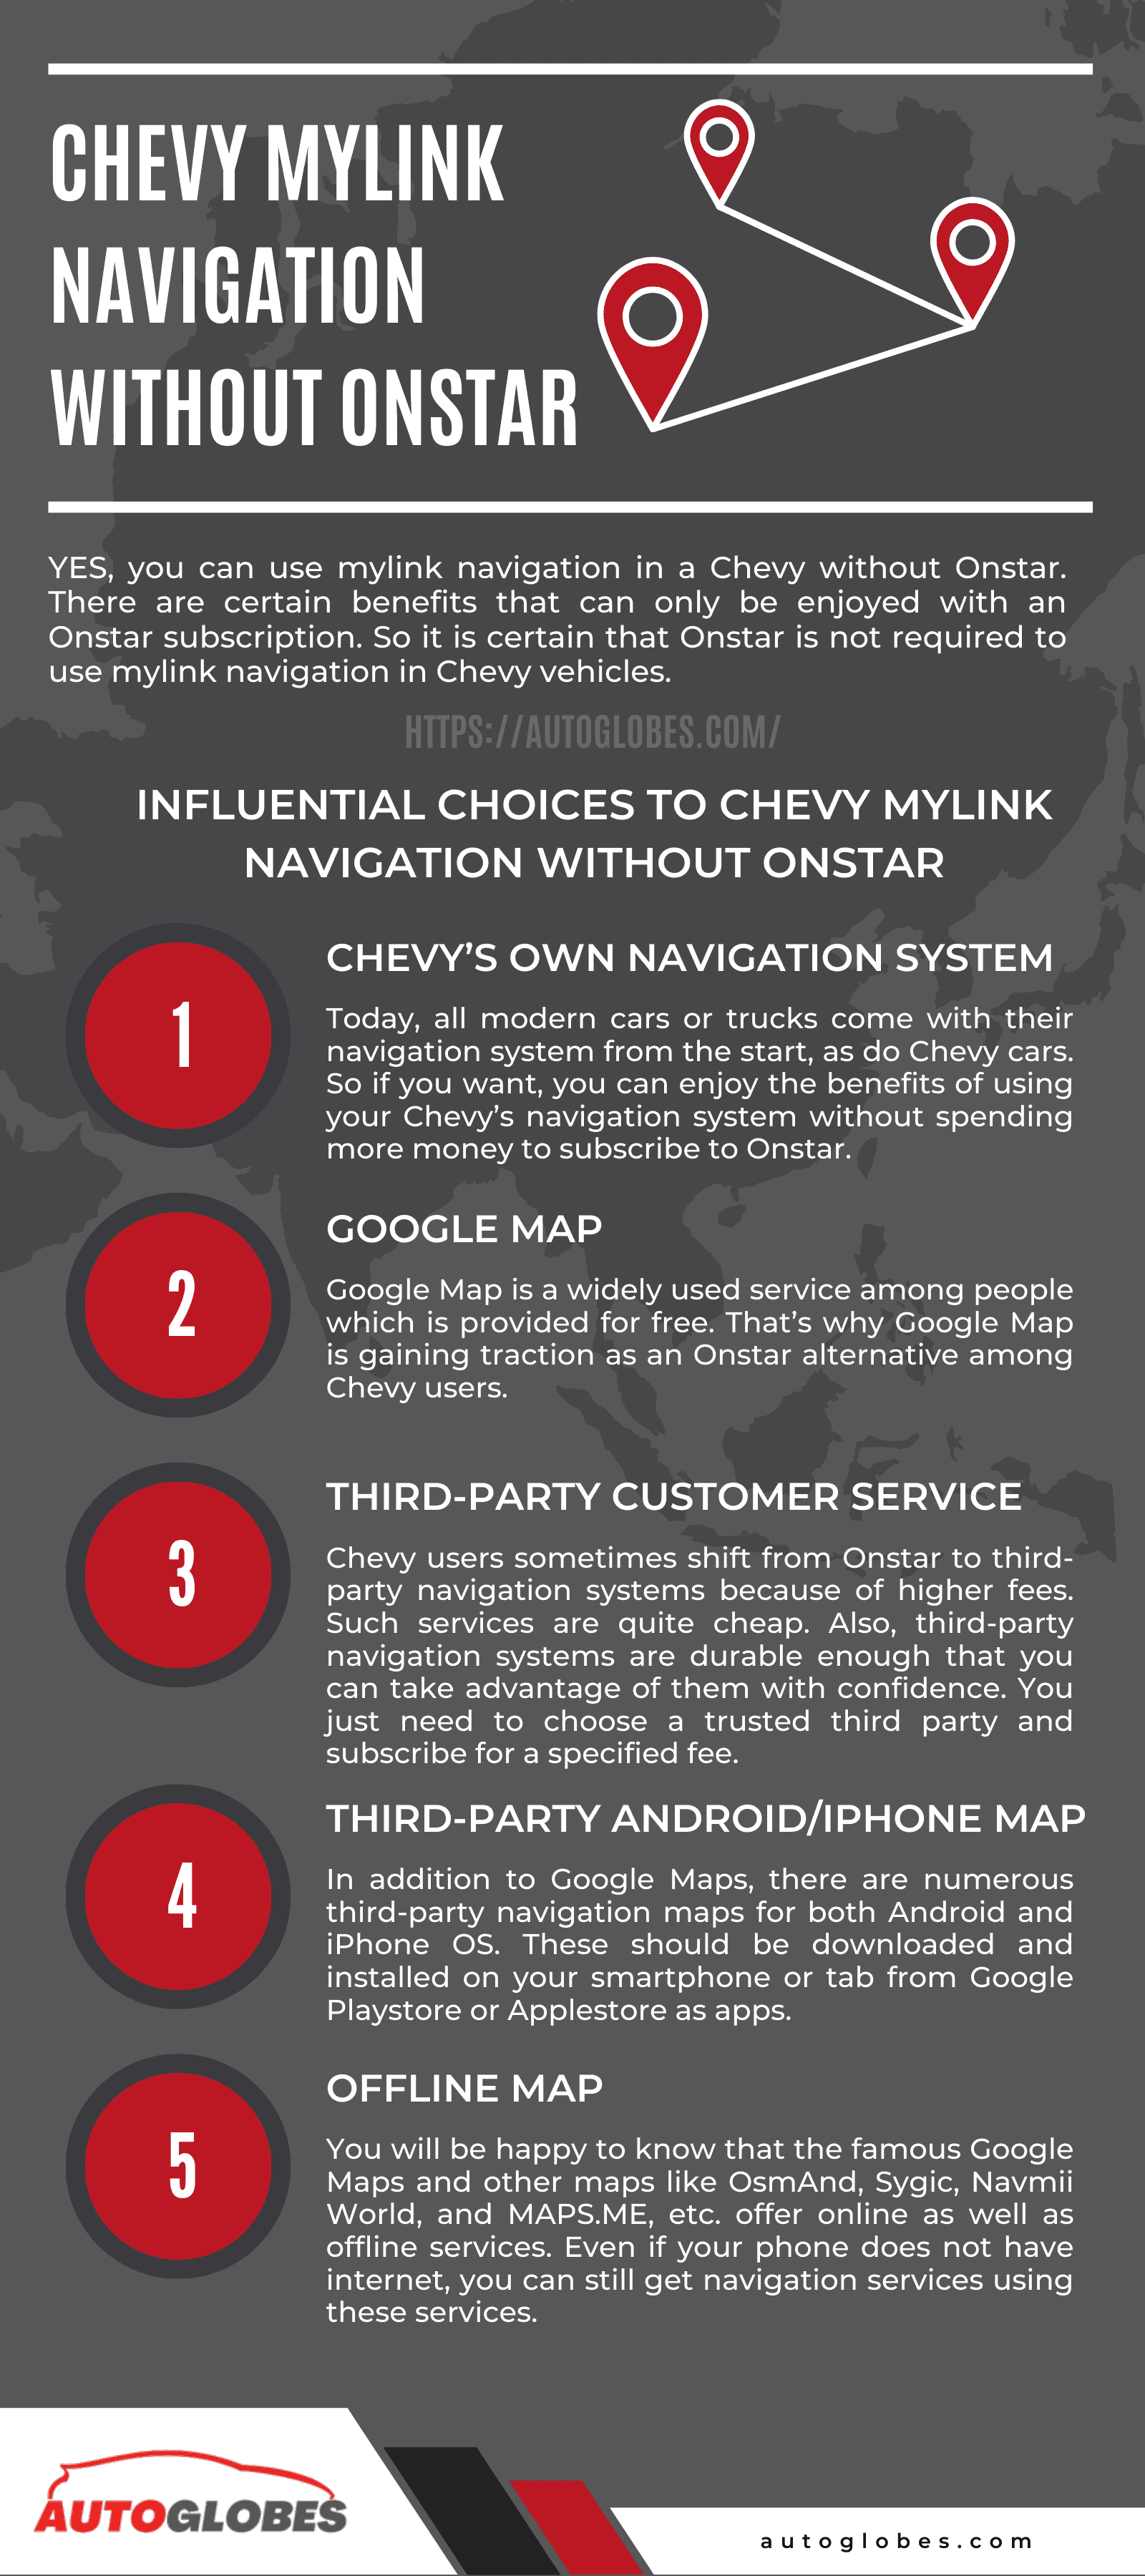 Chevy Mylink Navigation Without Onstar Infographic